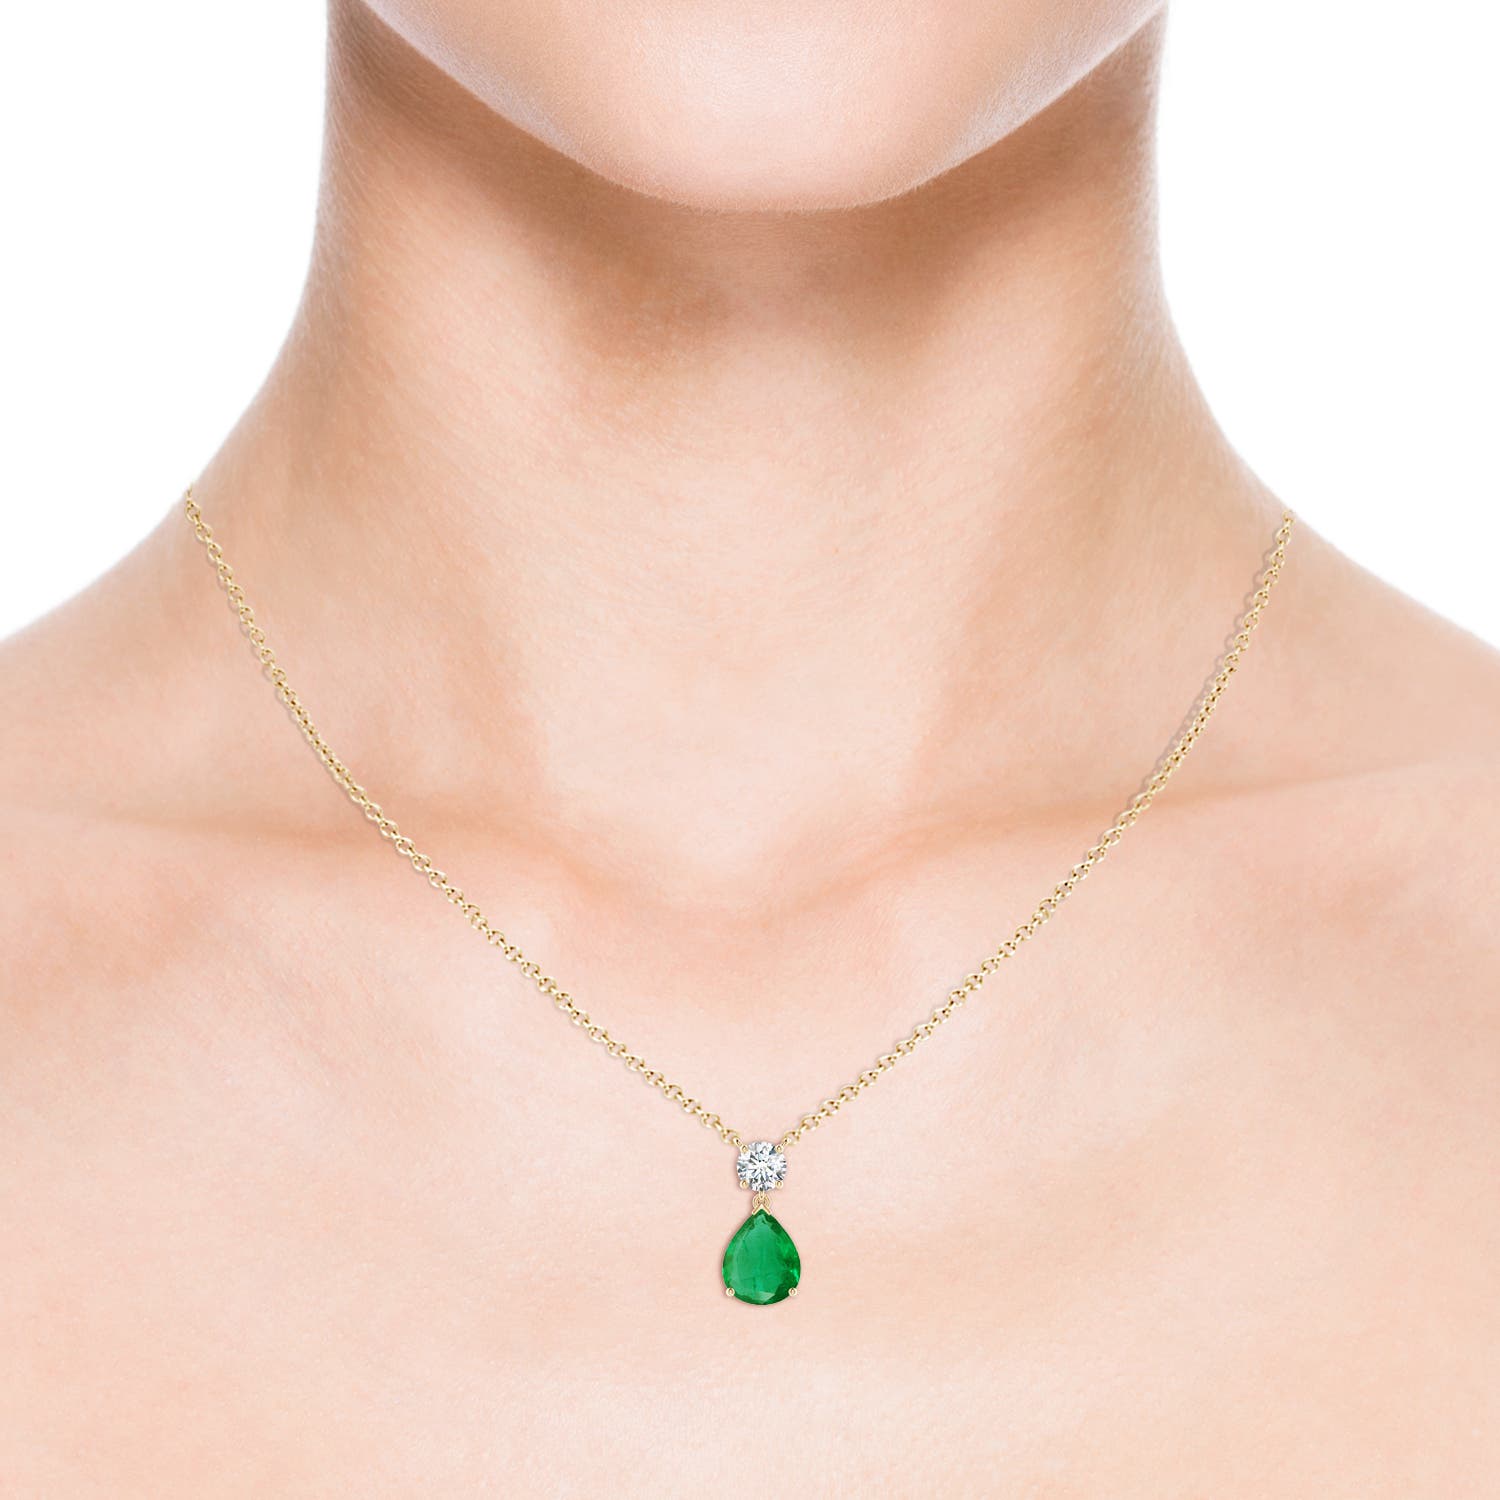 AA - Emerald / 3 CT / 14 KT Yellow Gold